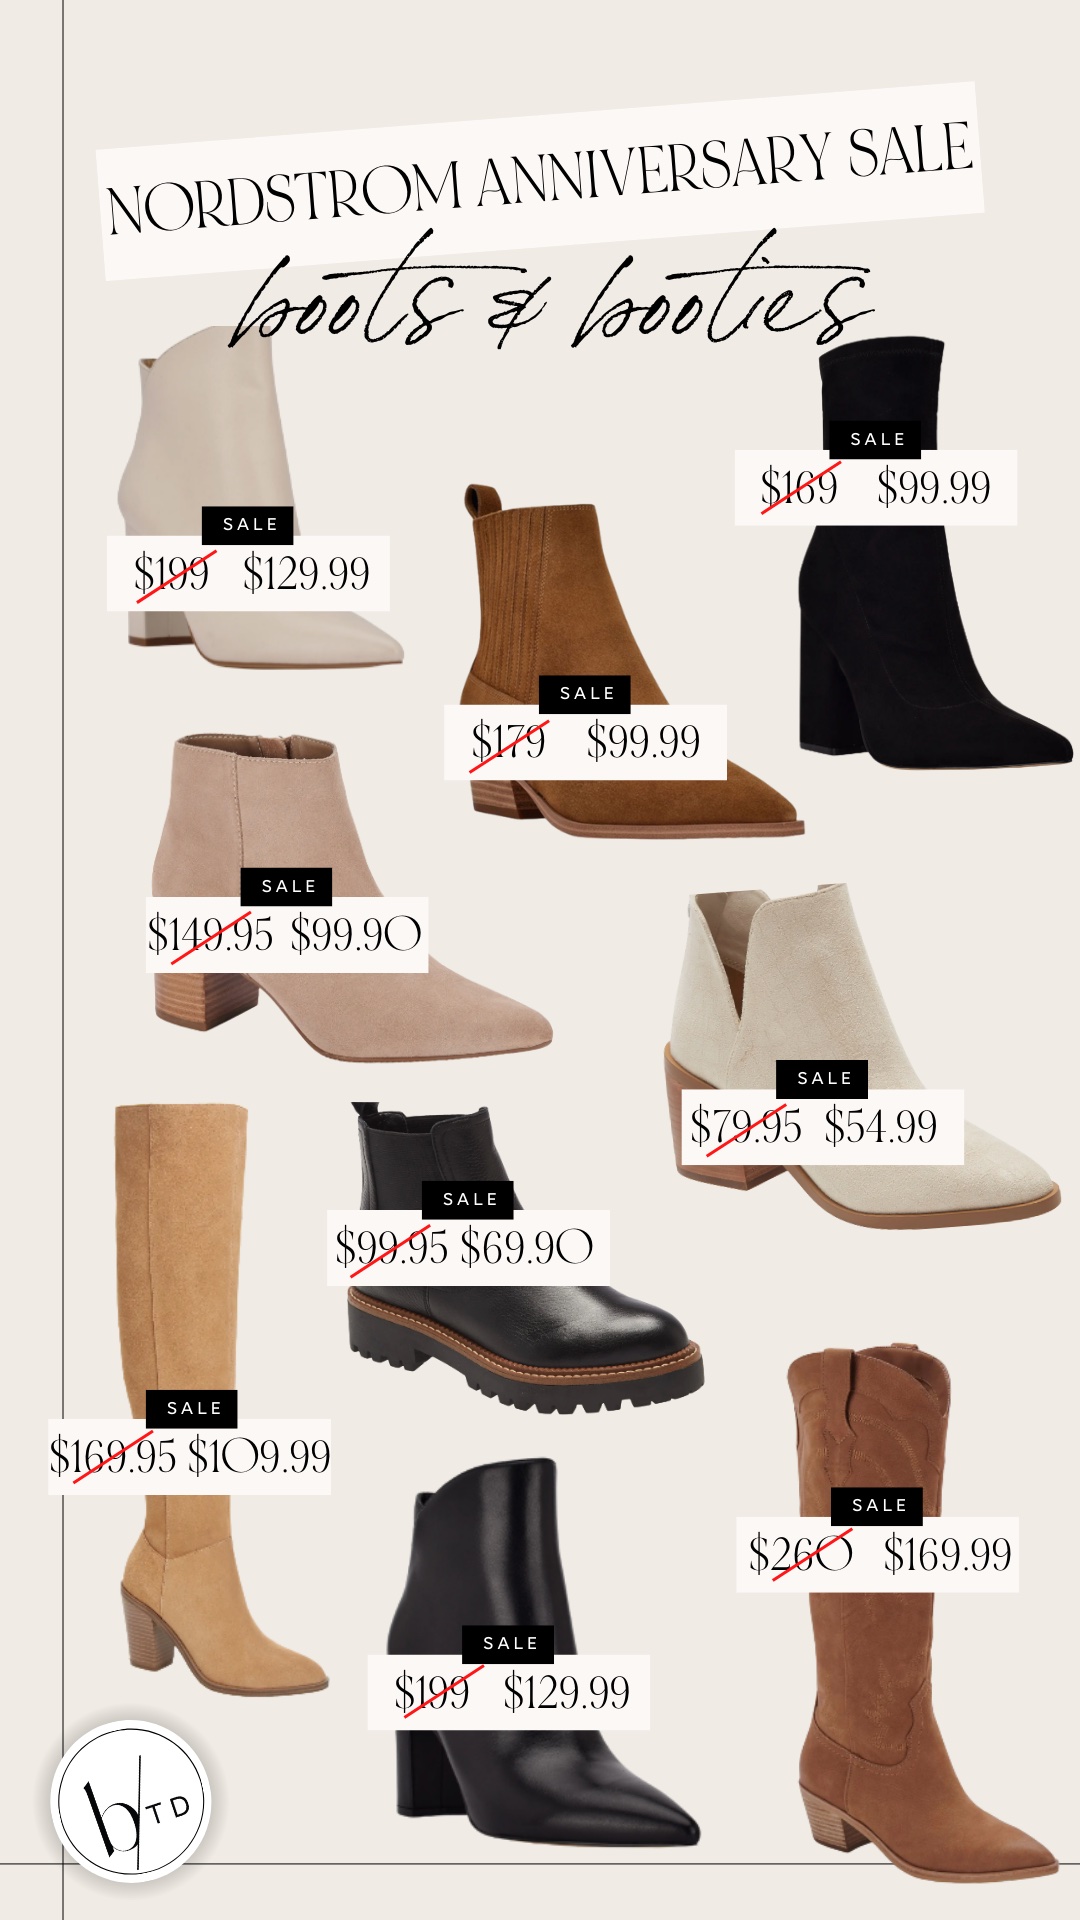 Nordstrom Anniversary Sale 2022 Shoe Guide - Southern Curls & Pearls